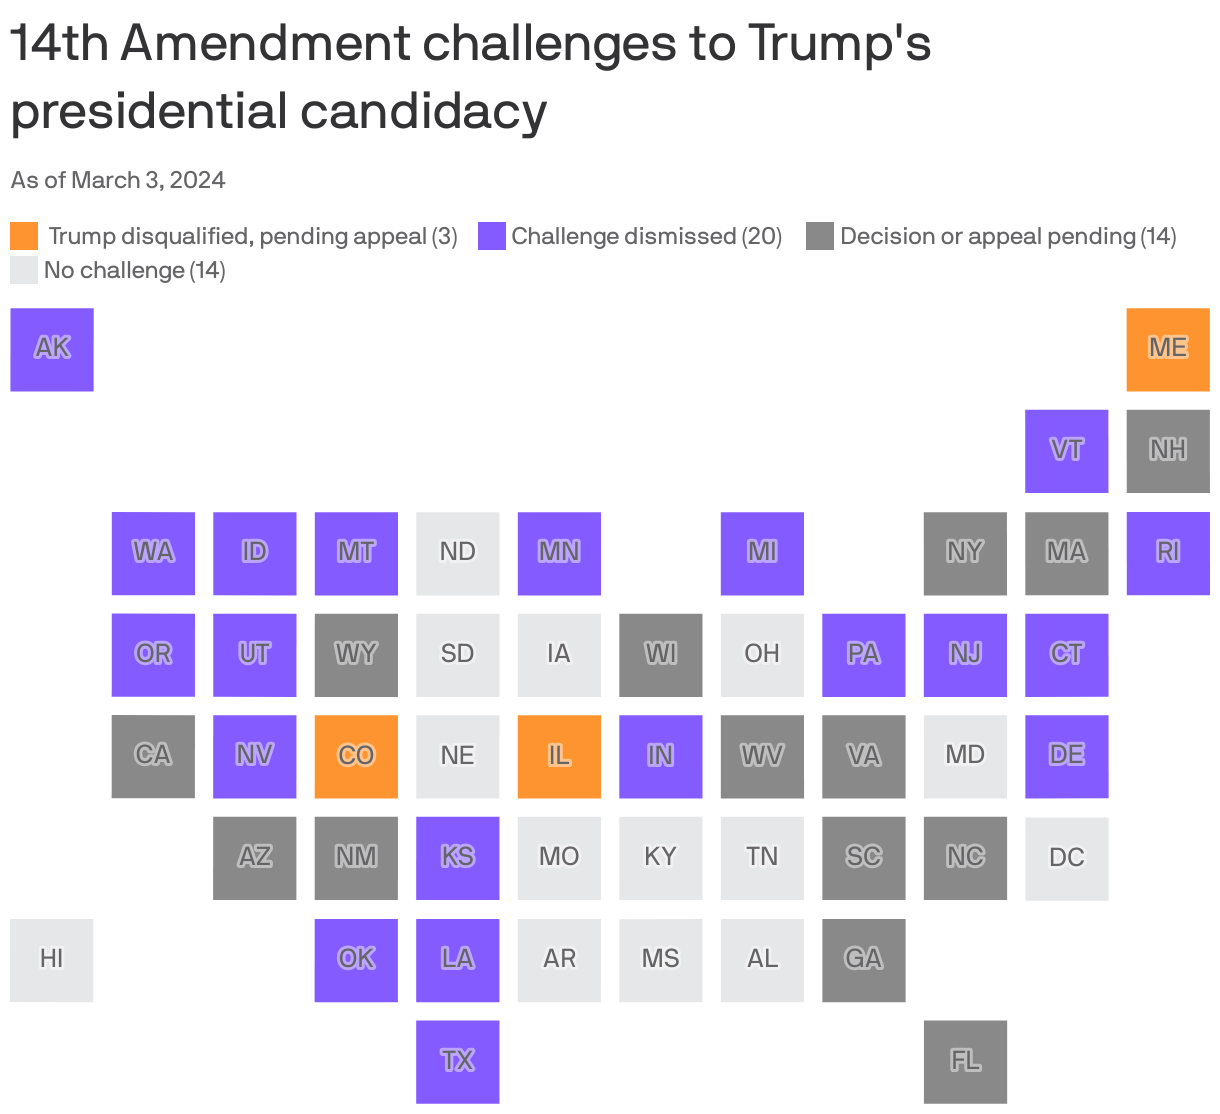 14th Amendment challenges to Trump's presidential candidacy